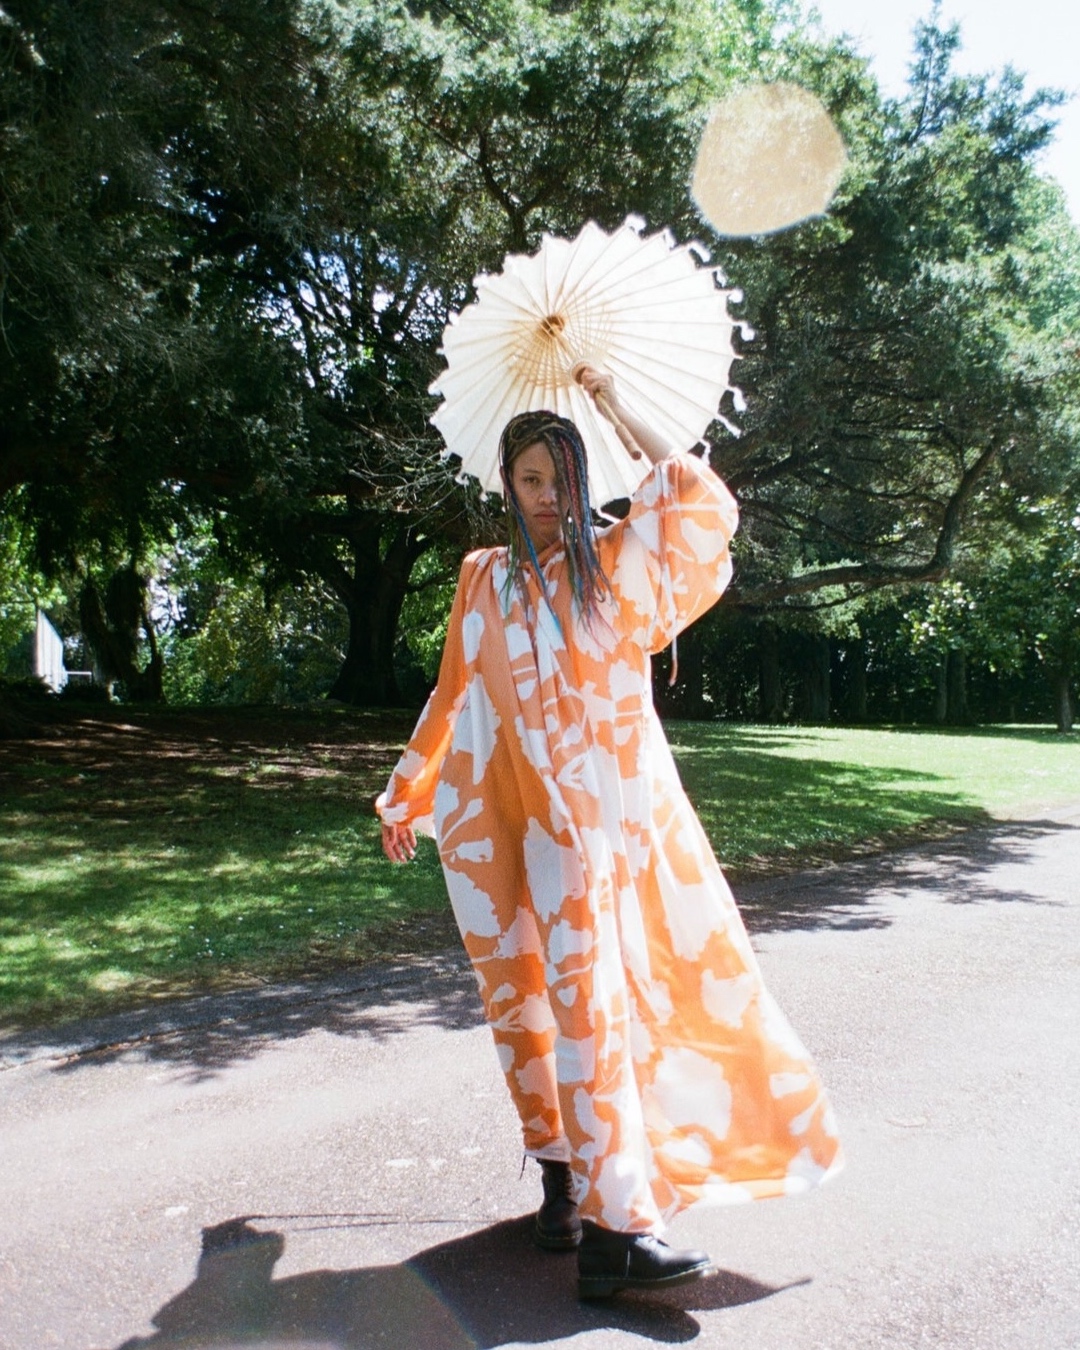 A woman with multicolored braids, wearing a flowing orange and white dress, holds a white parasol in a park. 